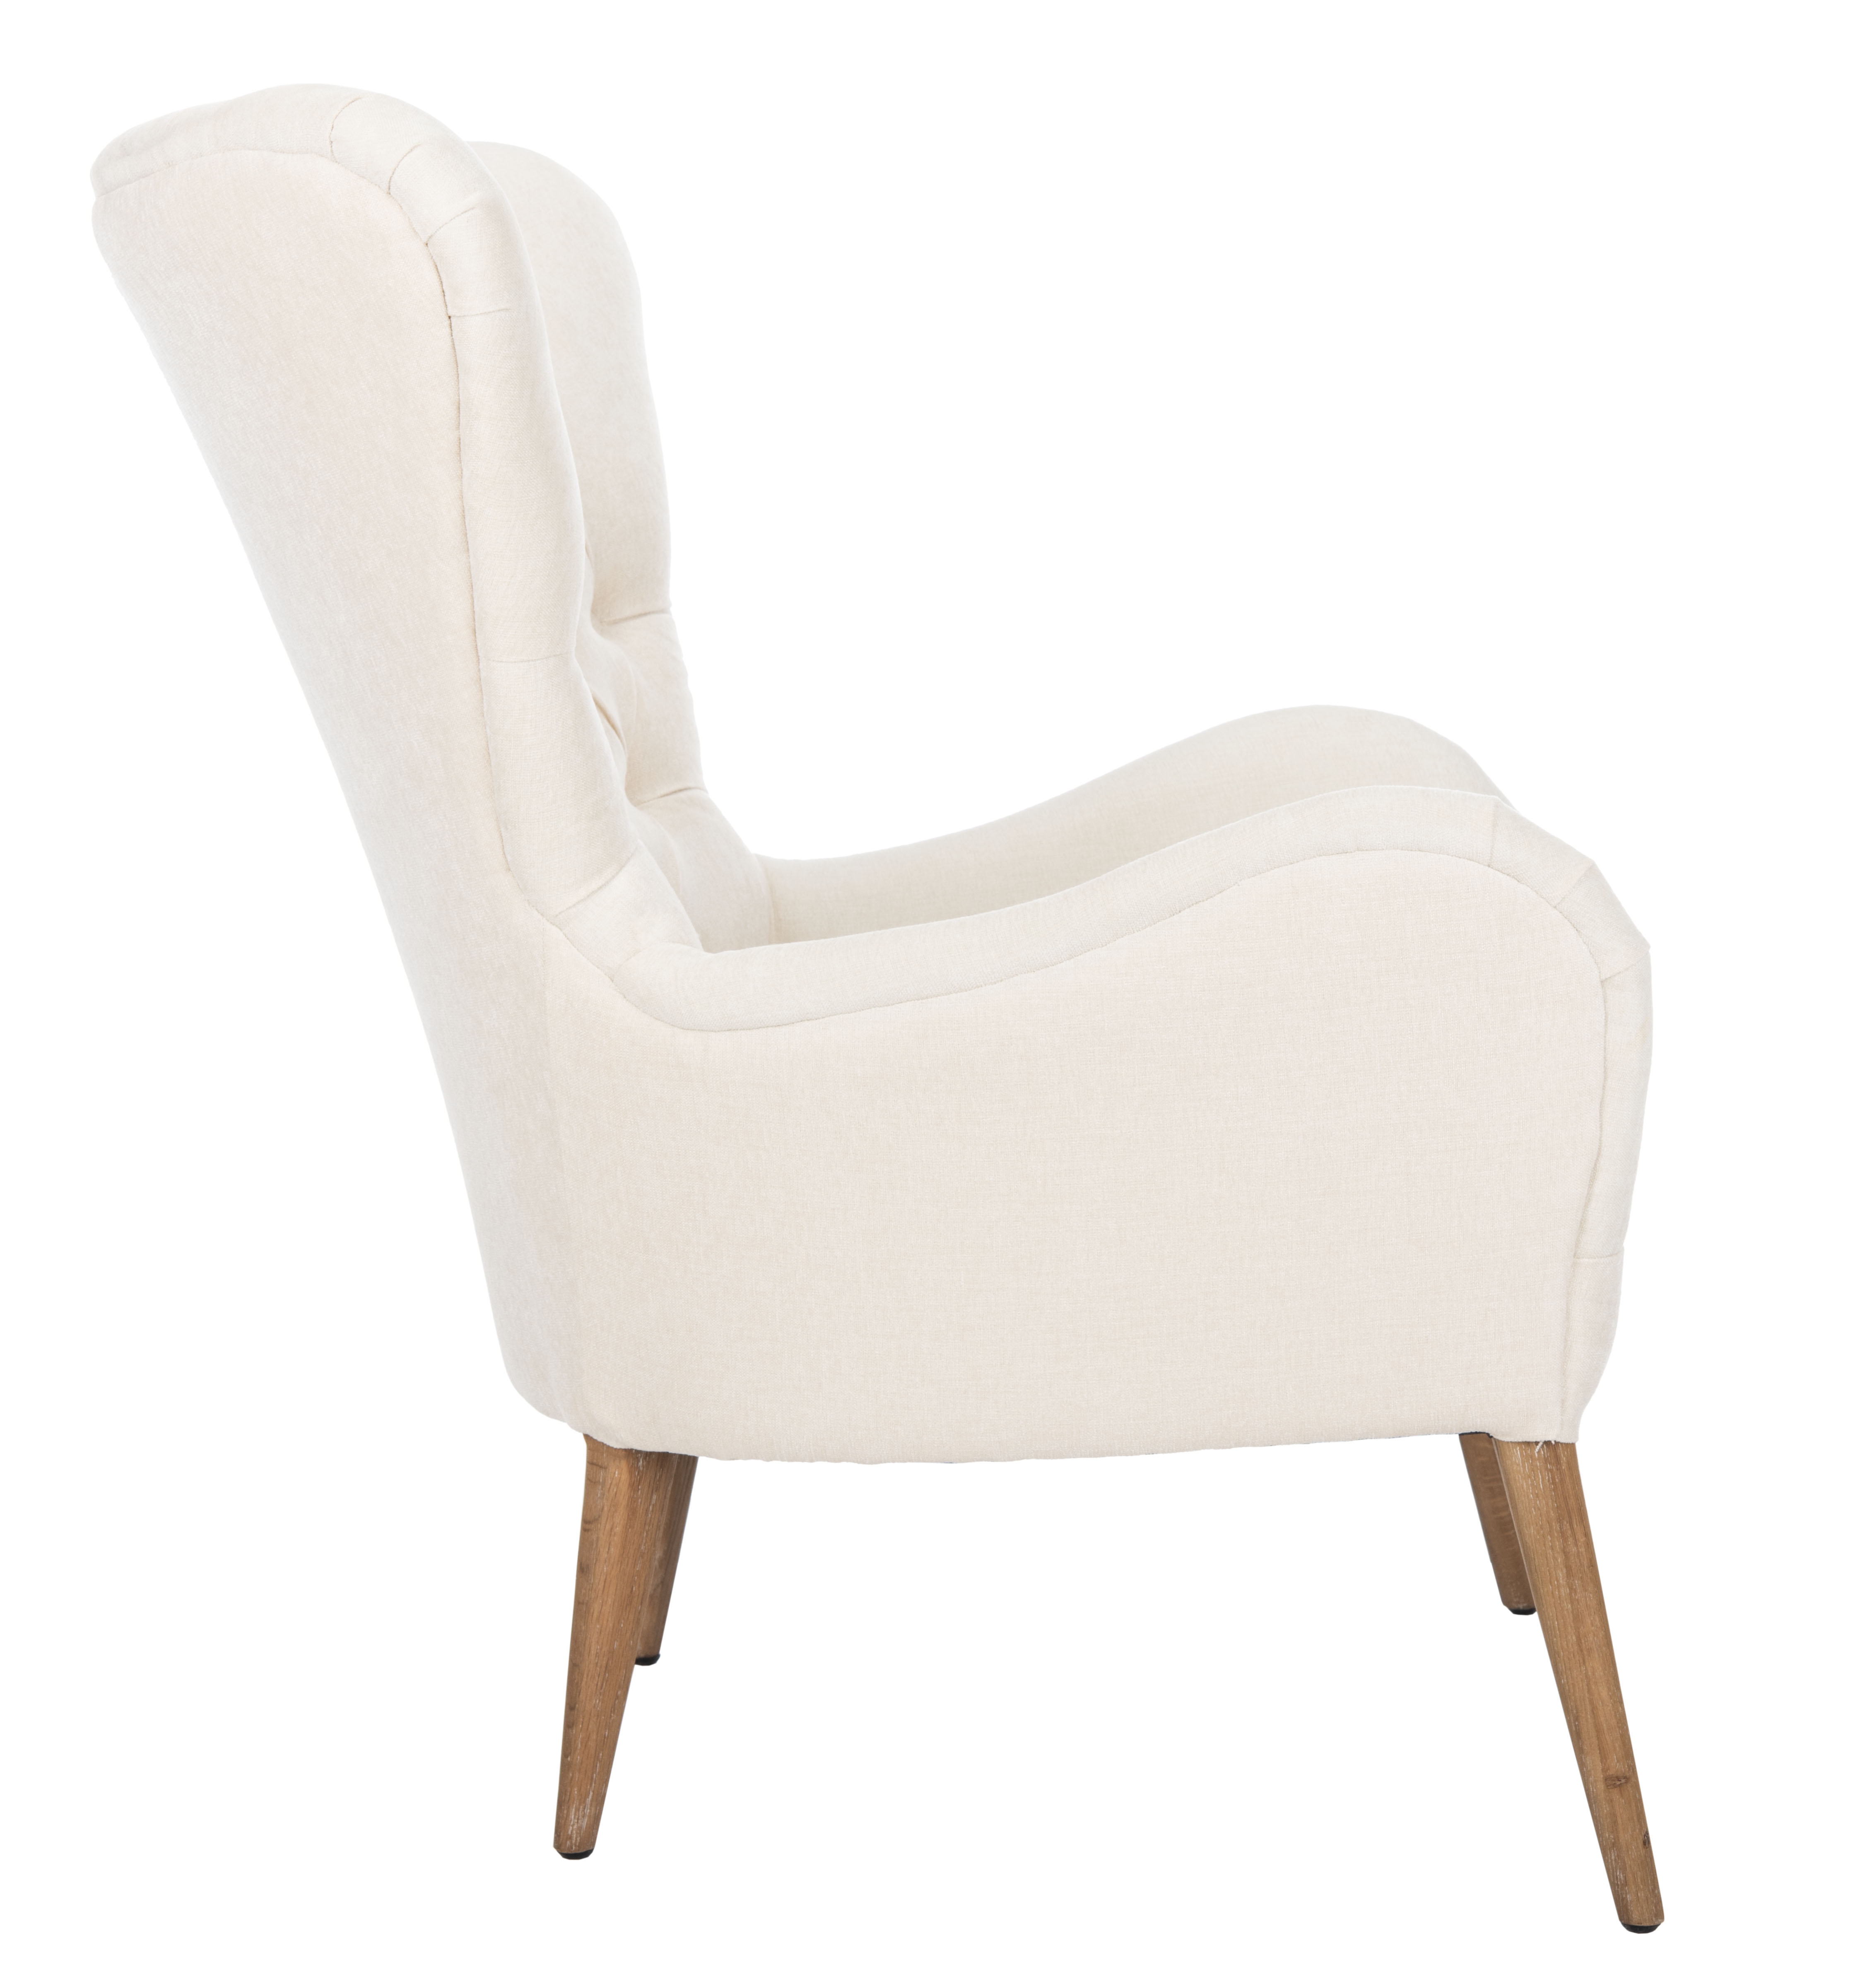 Brayden Contemporary Wingback Chair - Off White - Arlo Home - Image 3